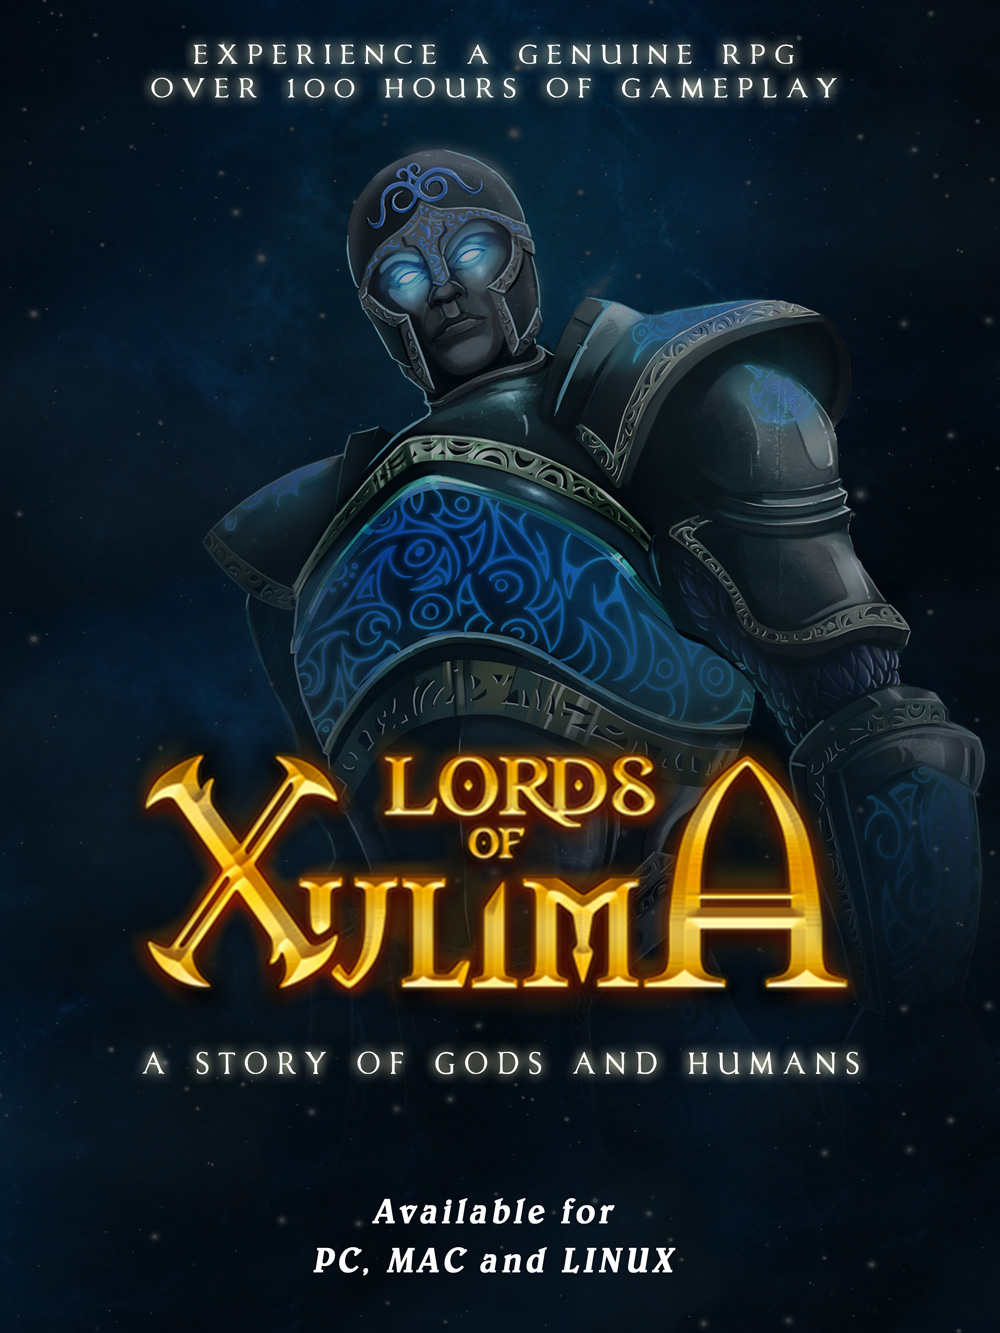 Lords of Xulima Numantian Games Logo